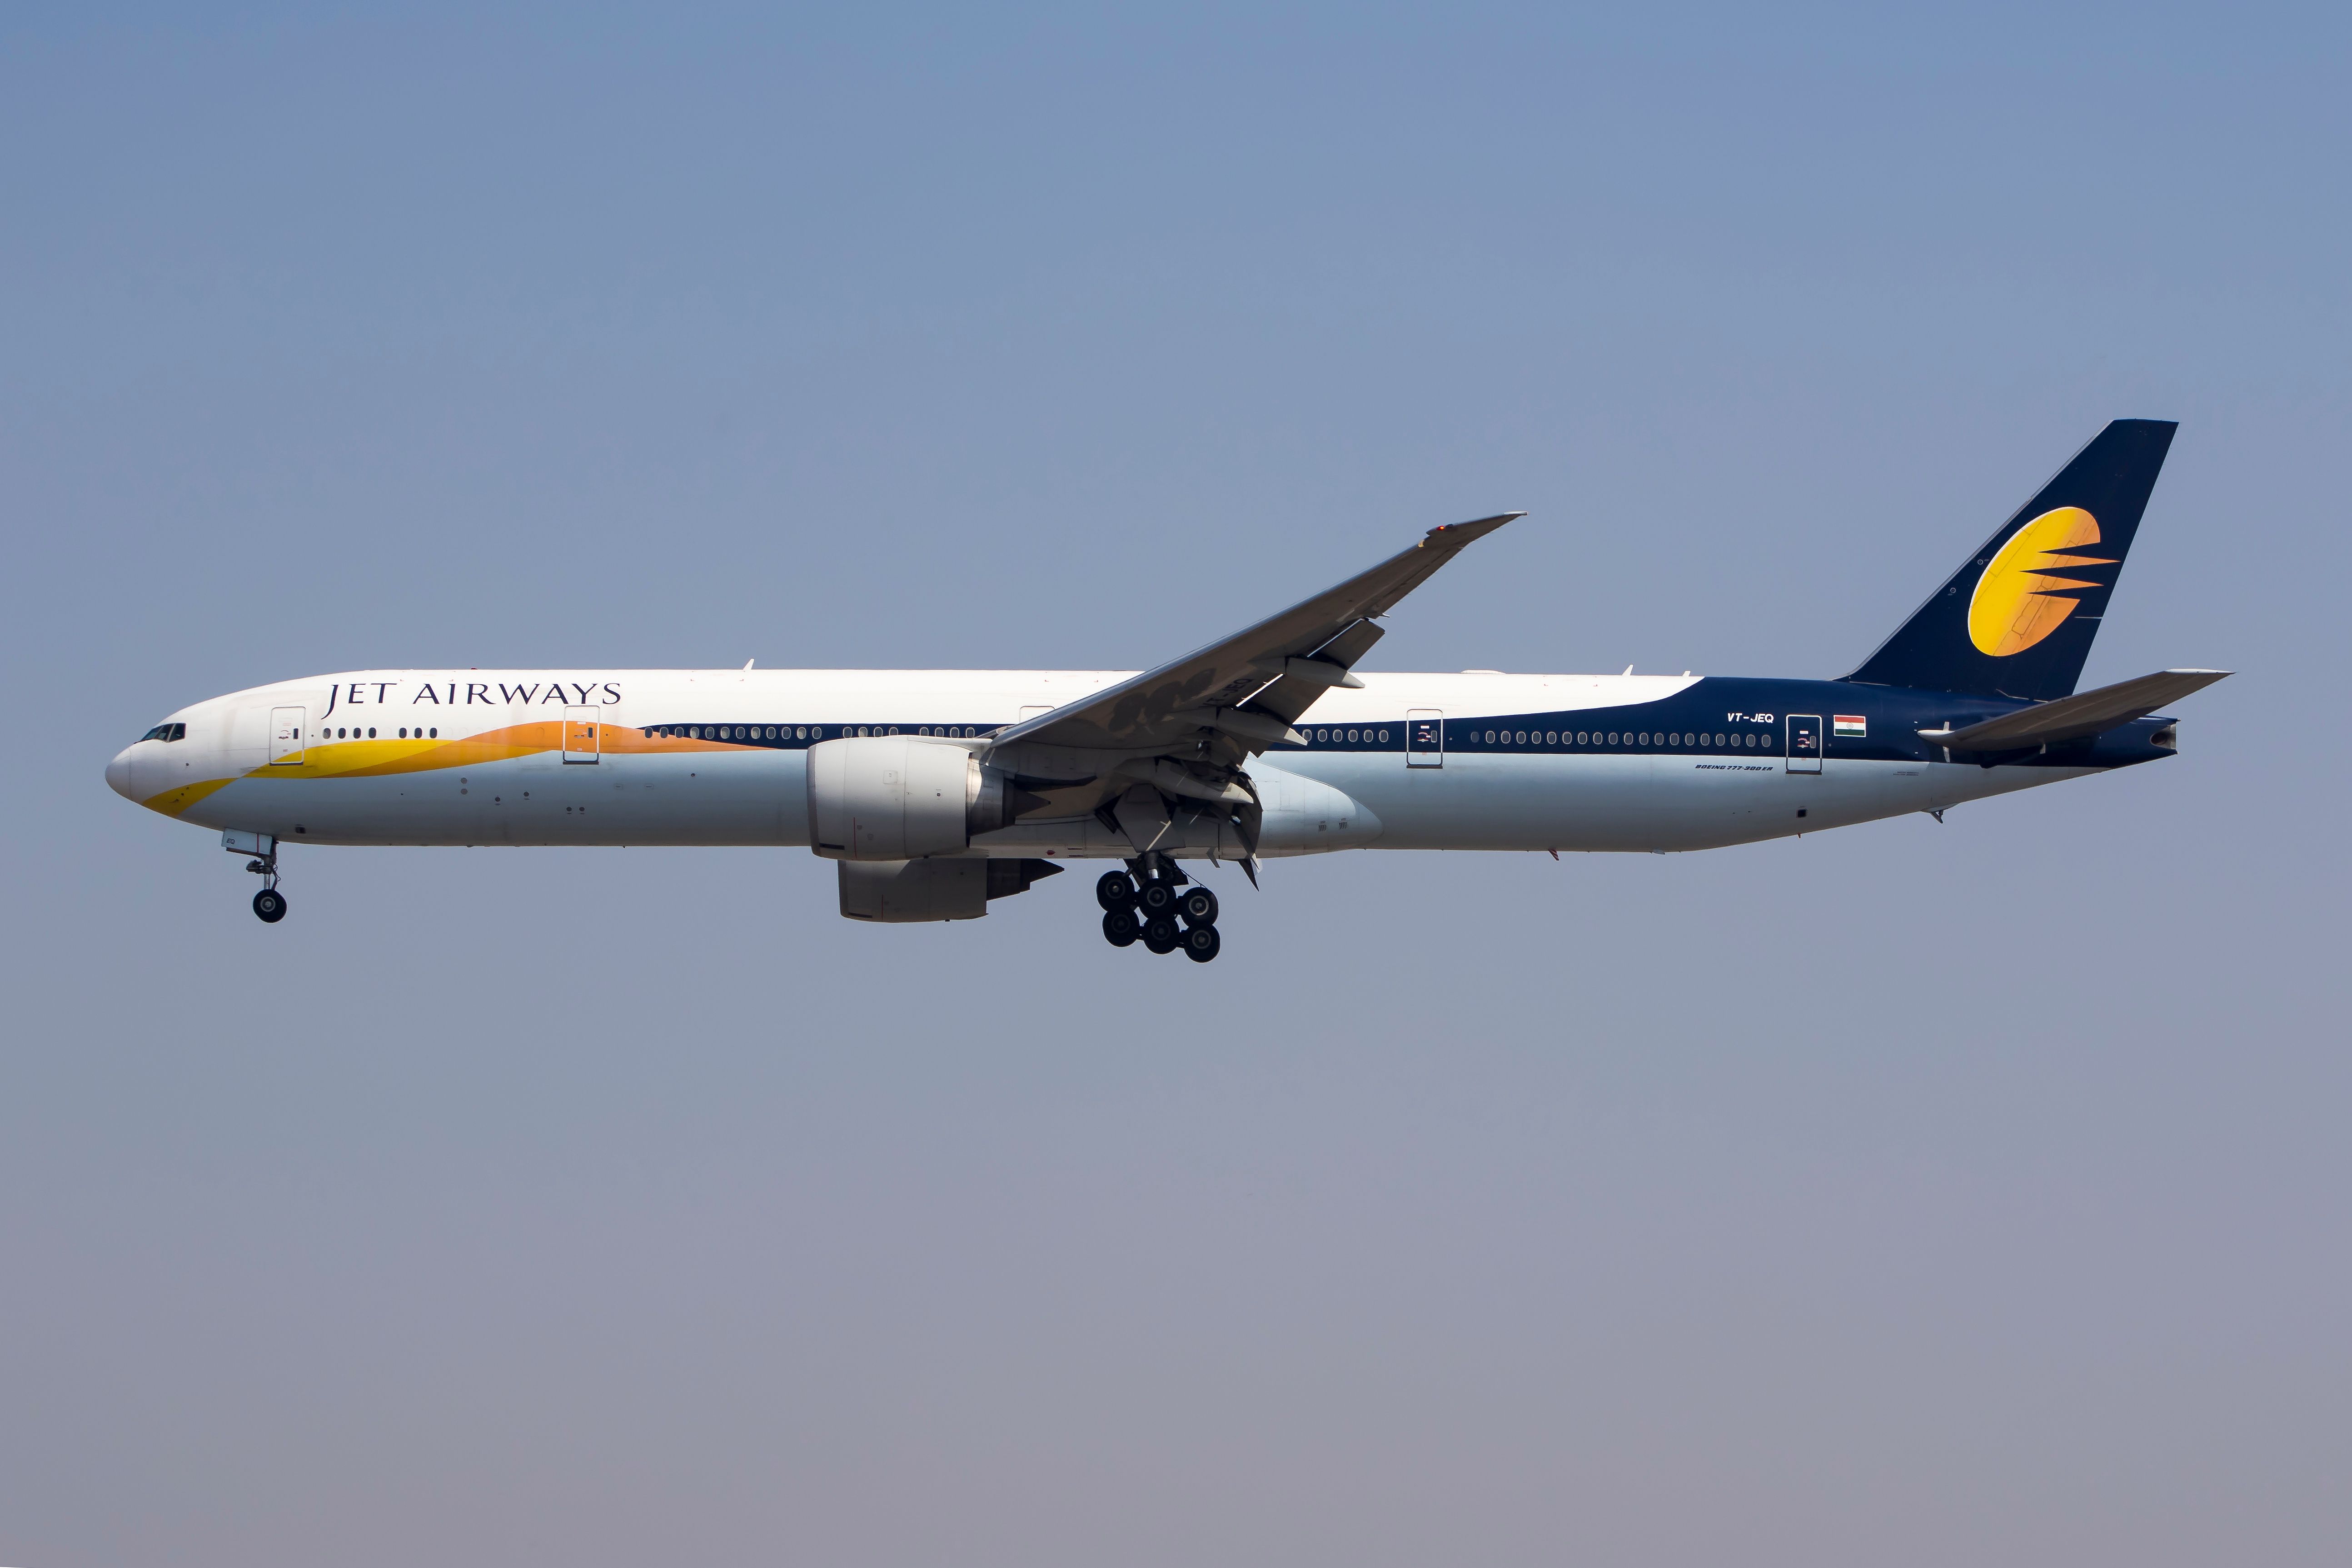 Jet Airways Boeing 777 with landing gear extended